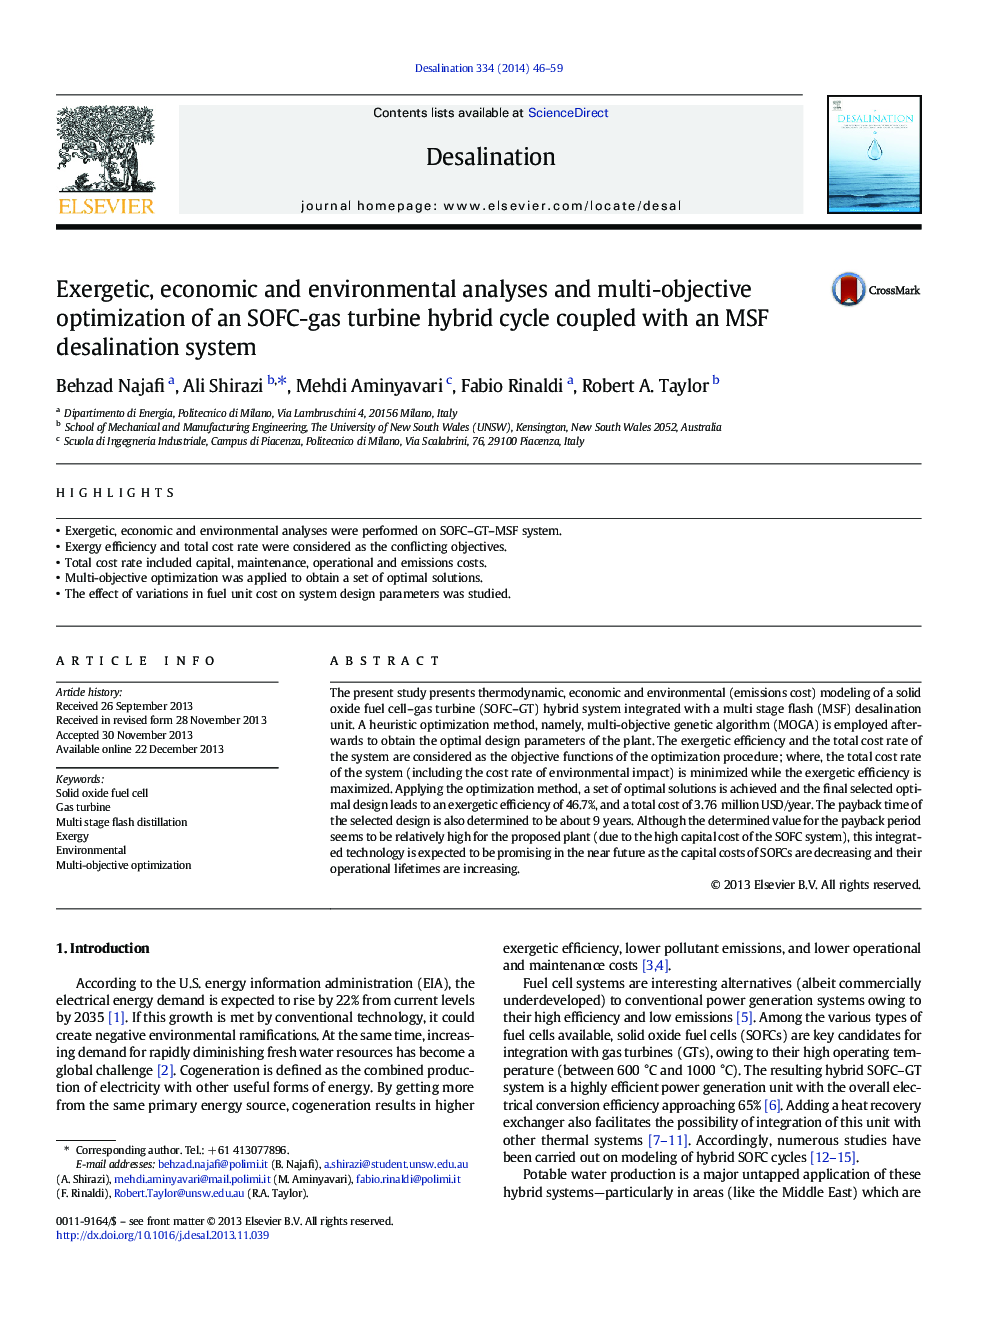 Exergetic, economic and environmental analyses and multi-objective optimization of an SOFC-gas turbine hybrid cycle coupled with an MSF desalination system